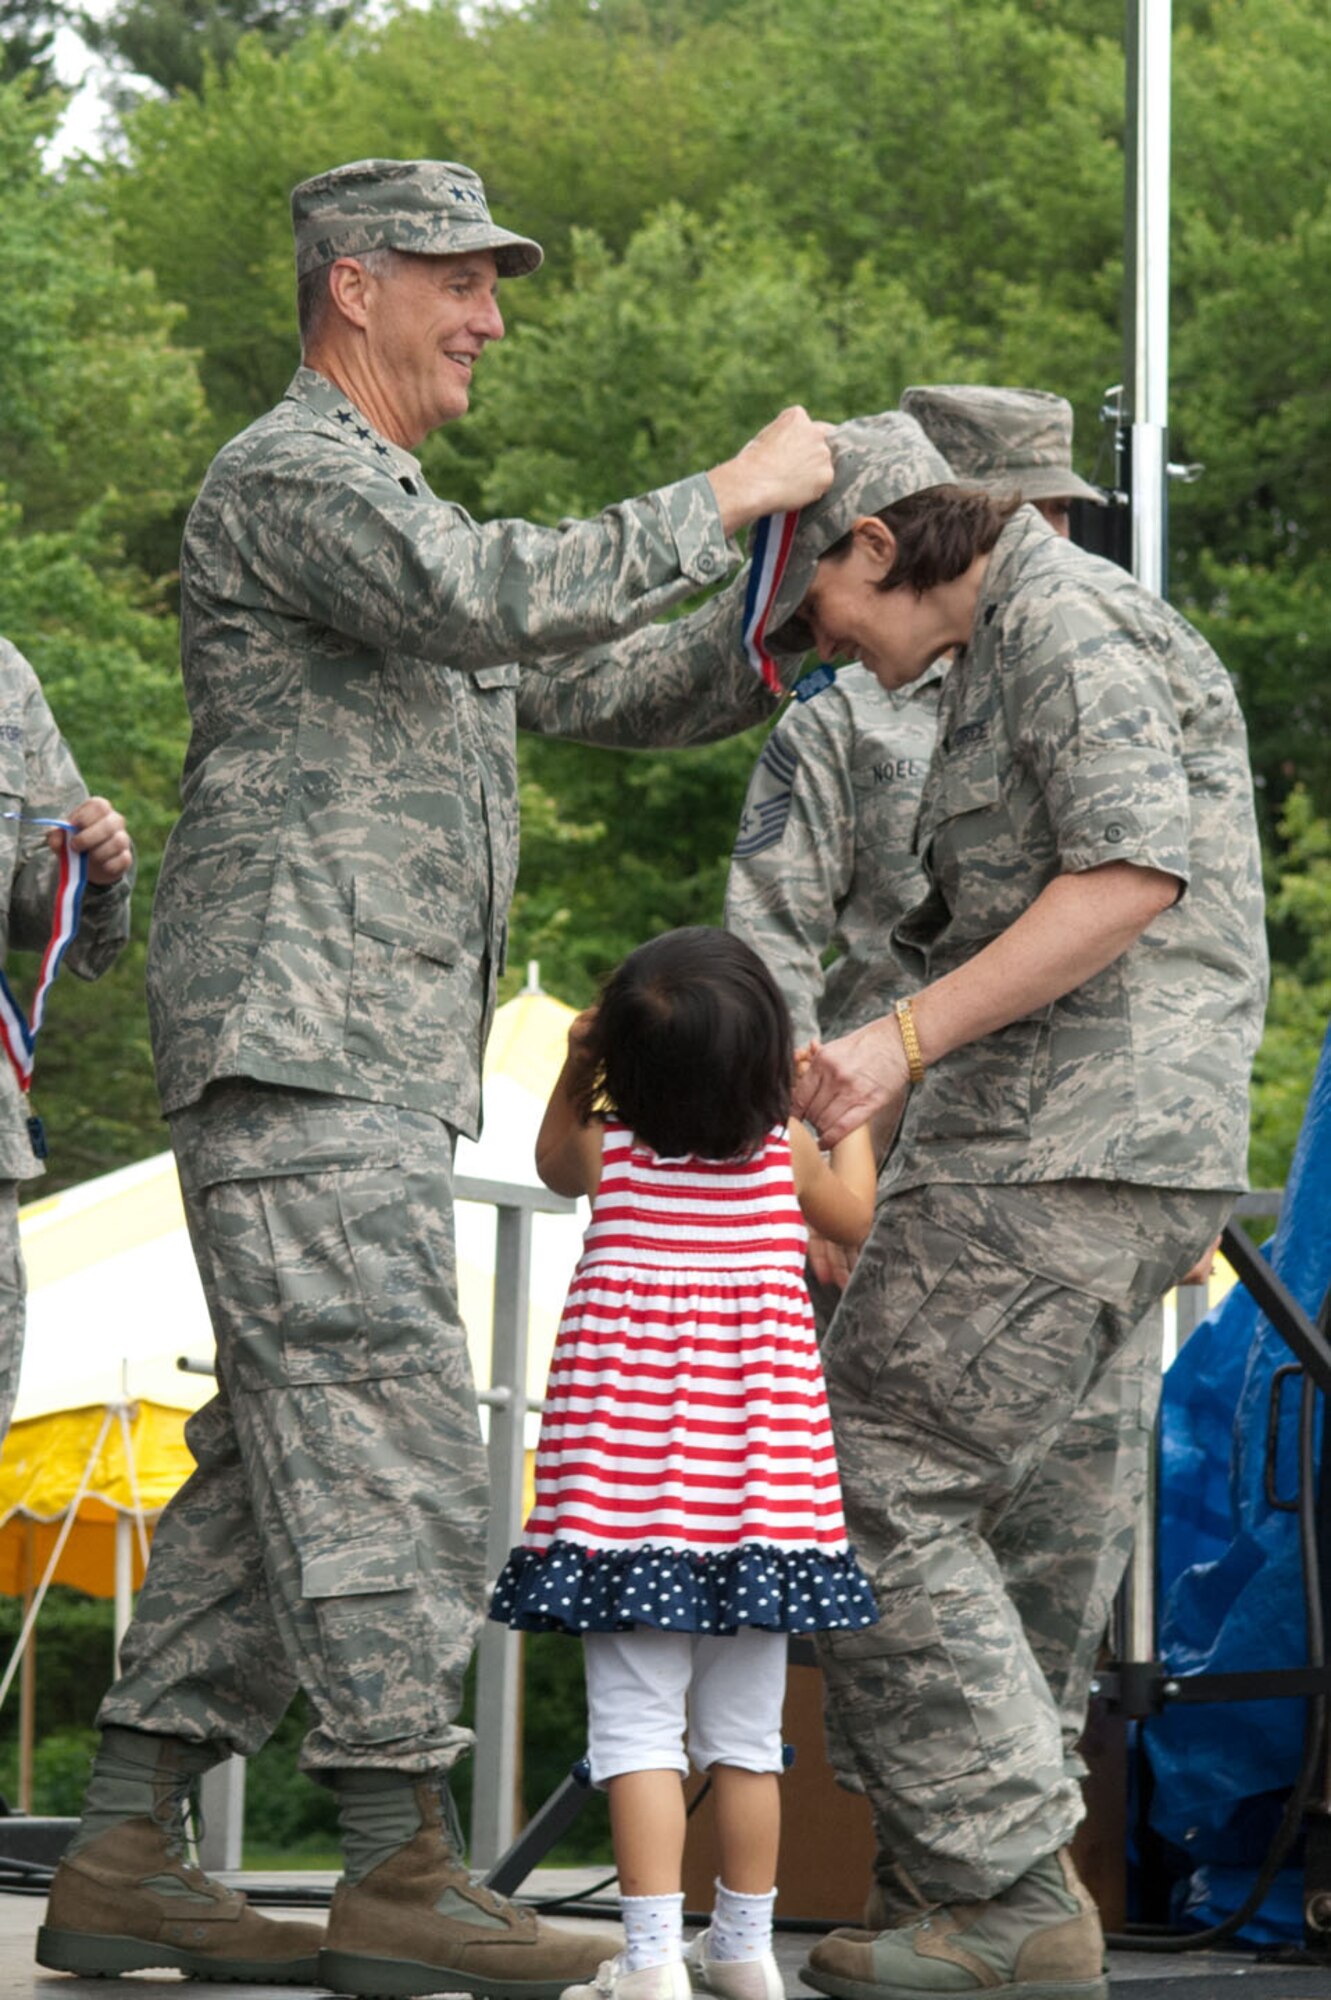 HANSCOM AIR FORCE BASE, Mass. – Lt. Gen. Ted Bowlds (left), Electronic Systems Center commander, presents a medallion to Lt. Col. Tamara Schwartz, along with her daughter, during Heroes Homecoming at Memorial Park June 24. More than 30 military men and women who have returned home from deployment within the last six months were honored during the pep rally-style event. (U.S. Air Force photo by Rick Berry)